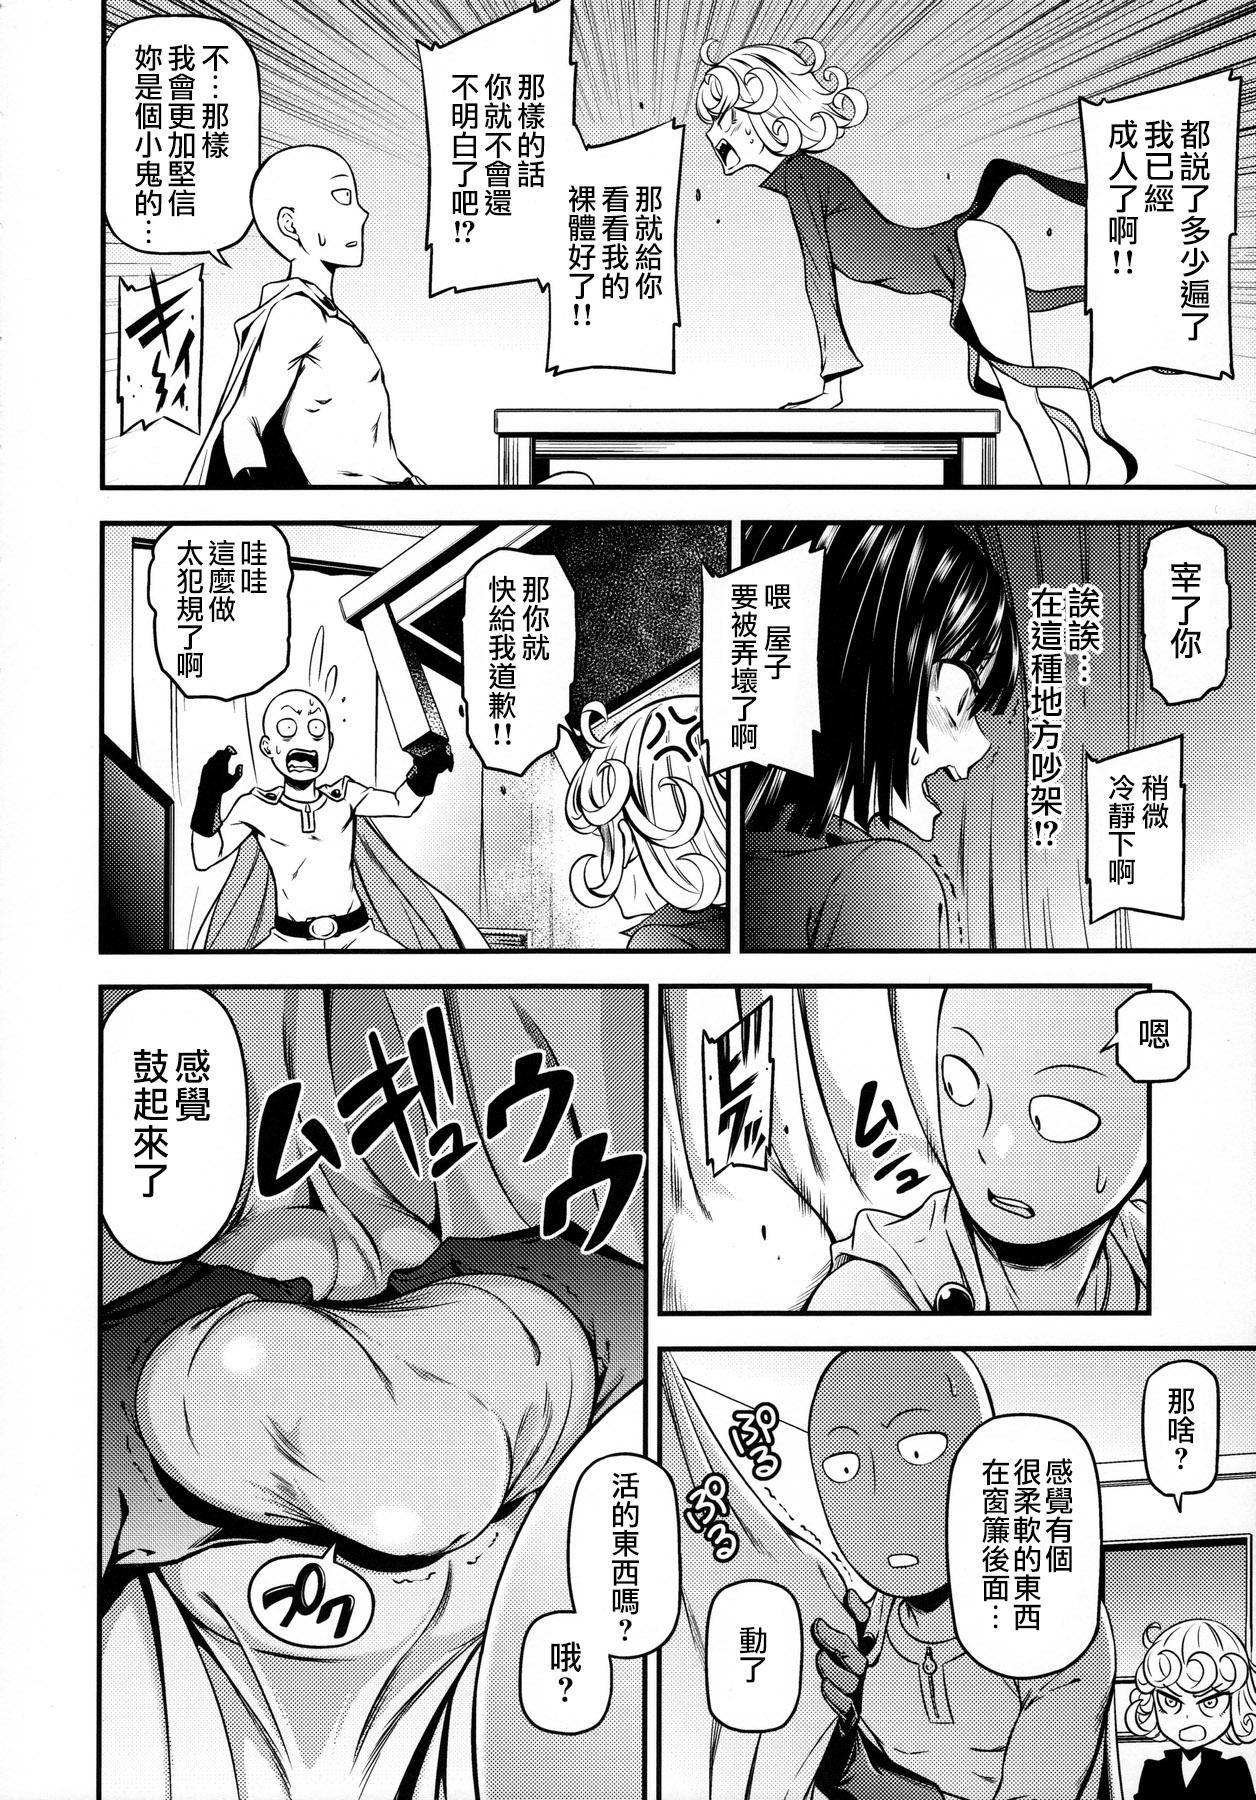 Best Blow Job Ever ONE-HURRICANE 4 - One punch man Outdoors - Page 5